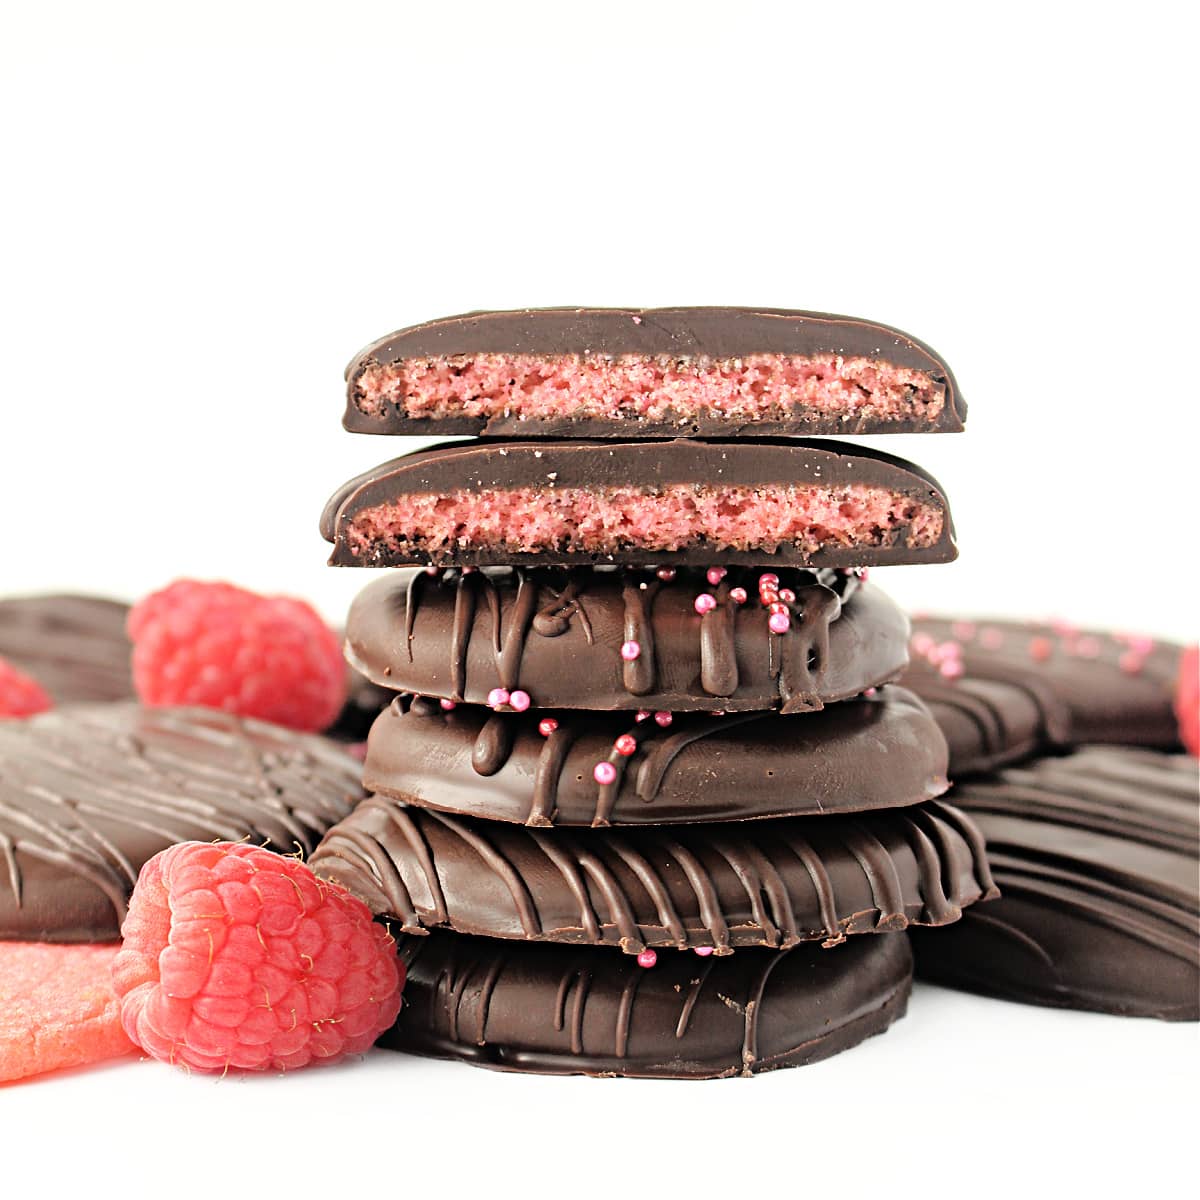 Stack of chocolate coated cookies with two cookie halves on top showing pink cookie inside.